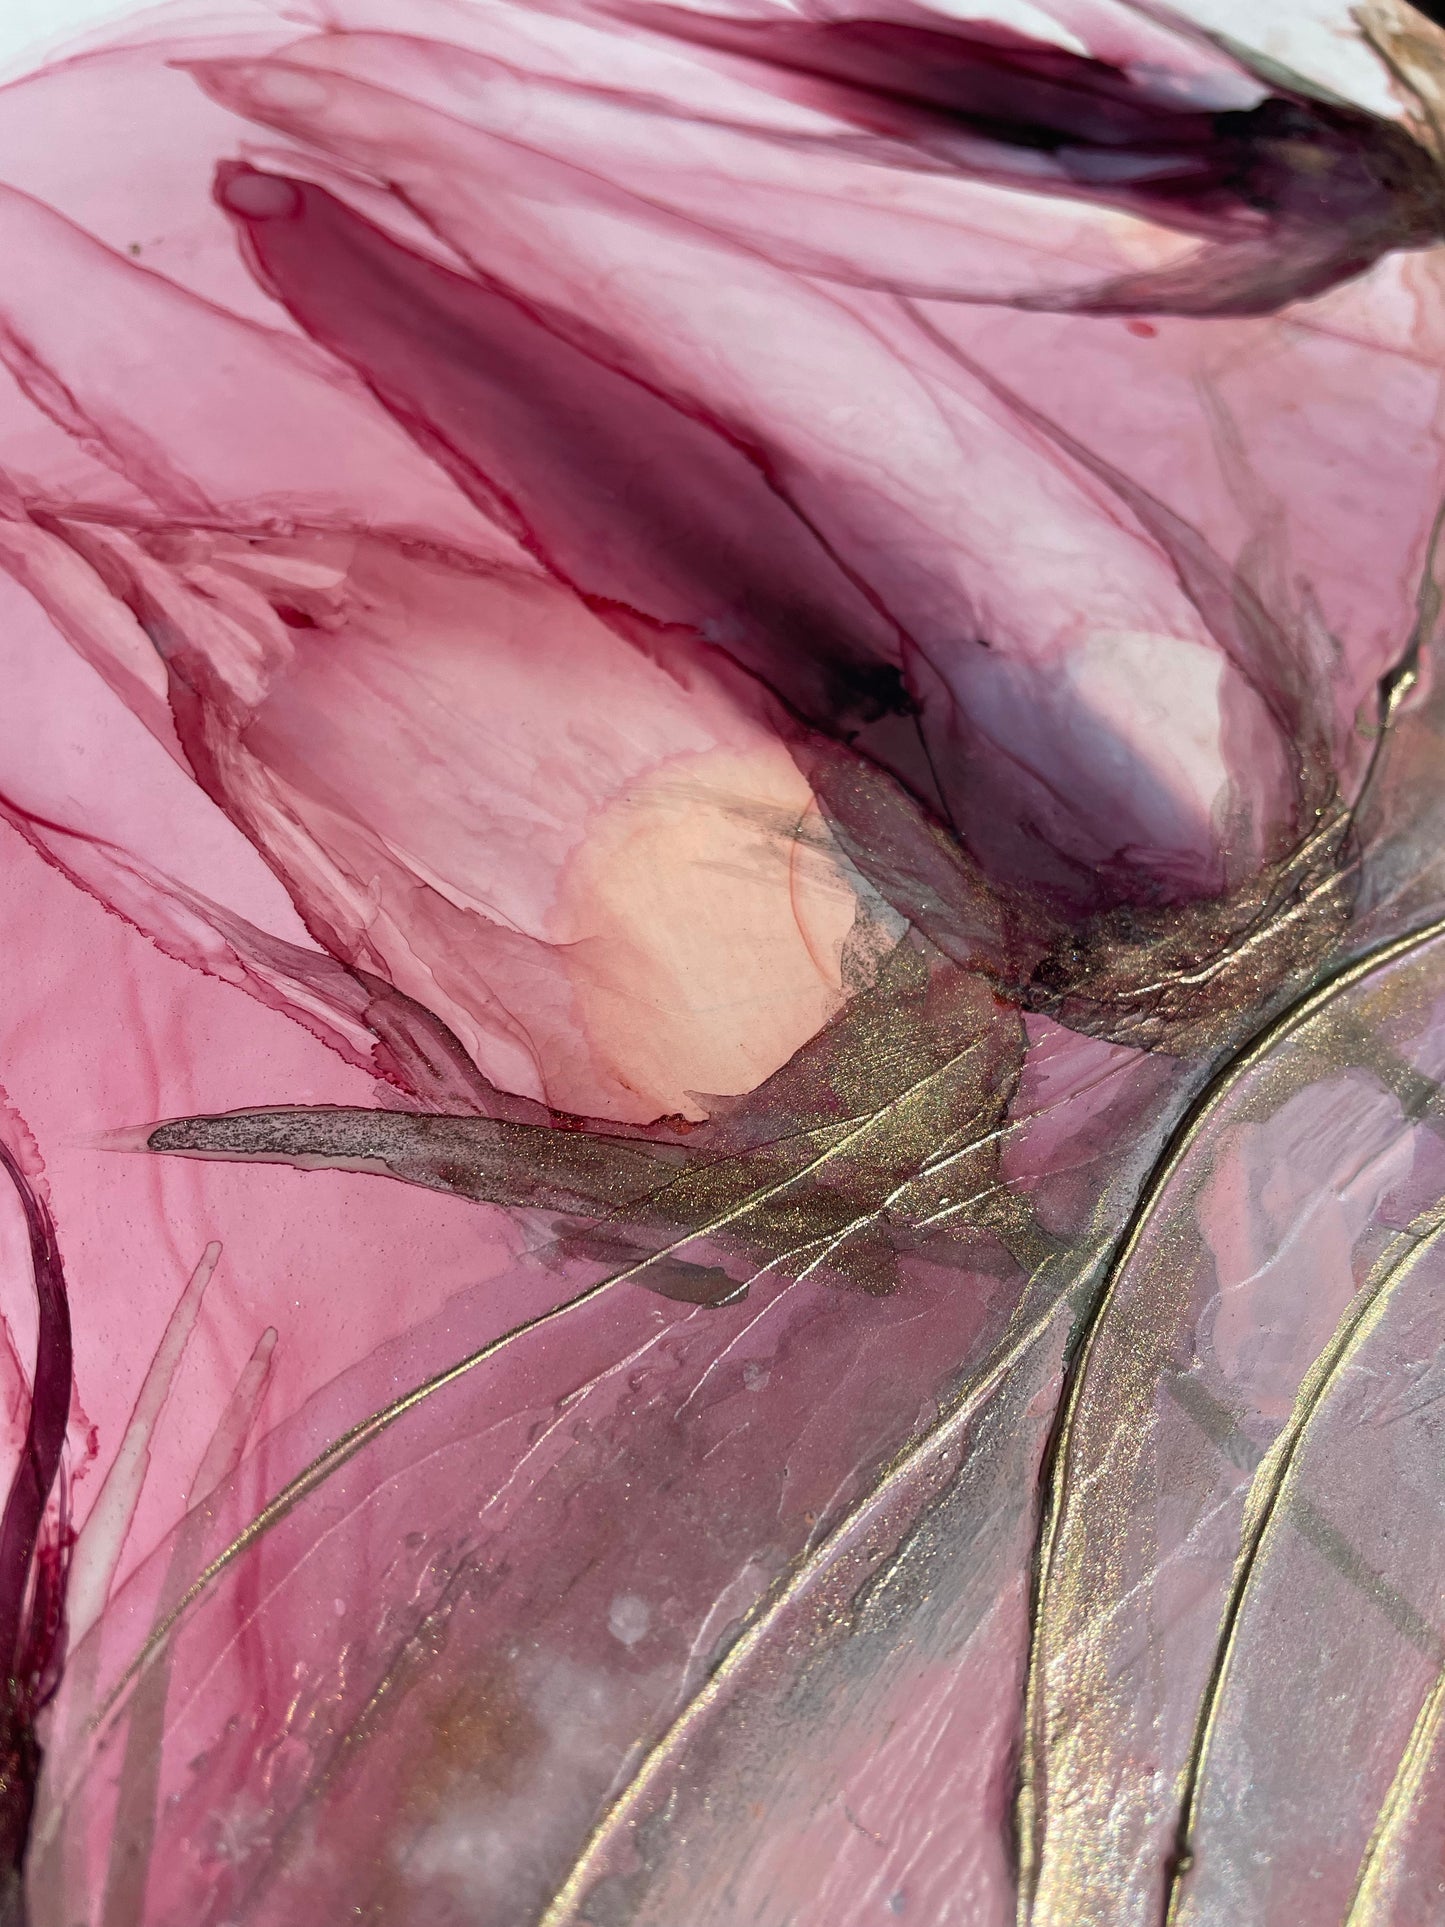 Veiled, original abstract floral art in pink and gold.